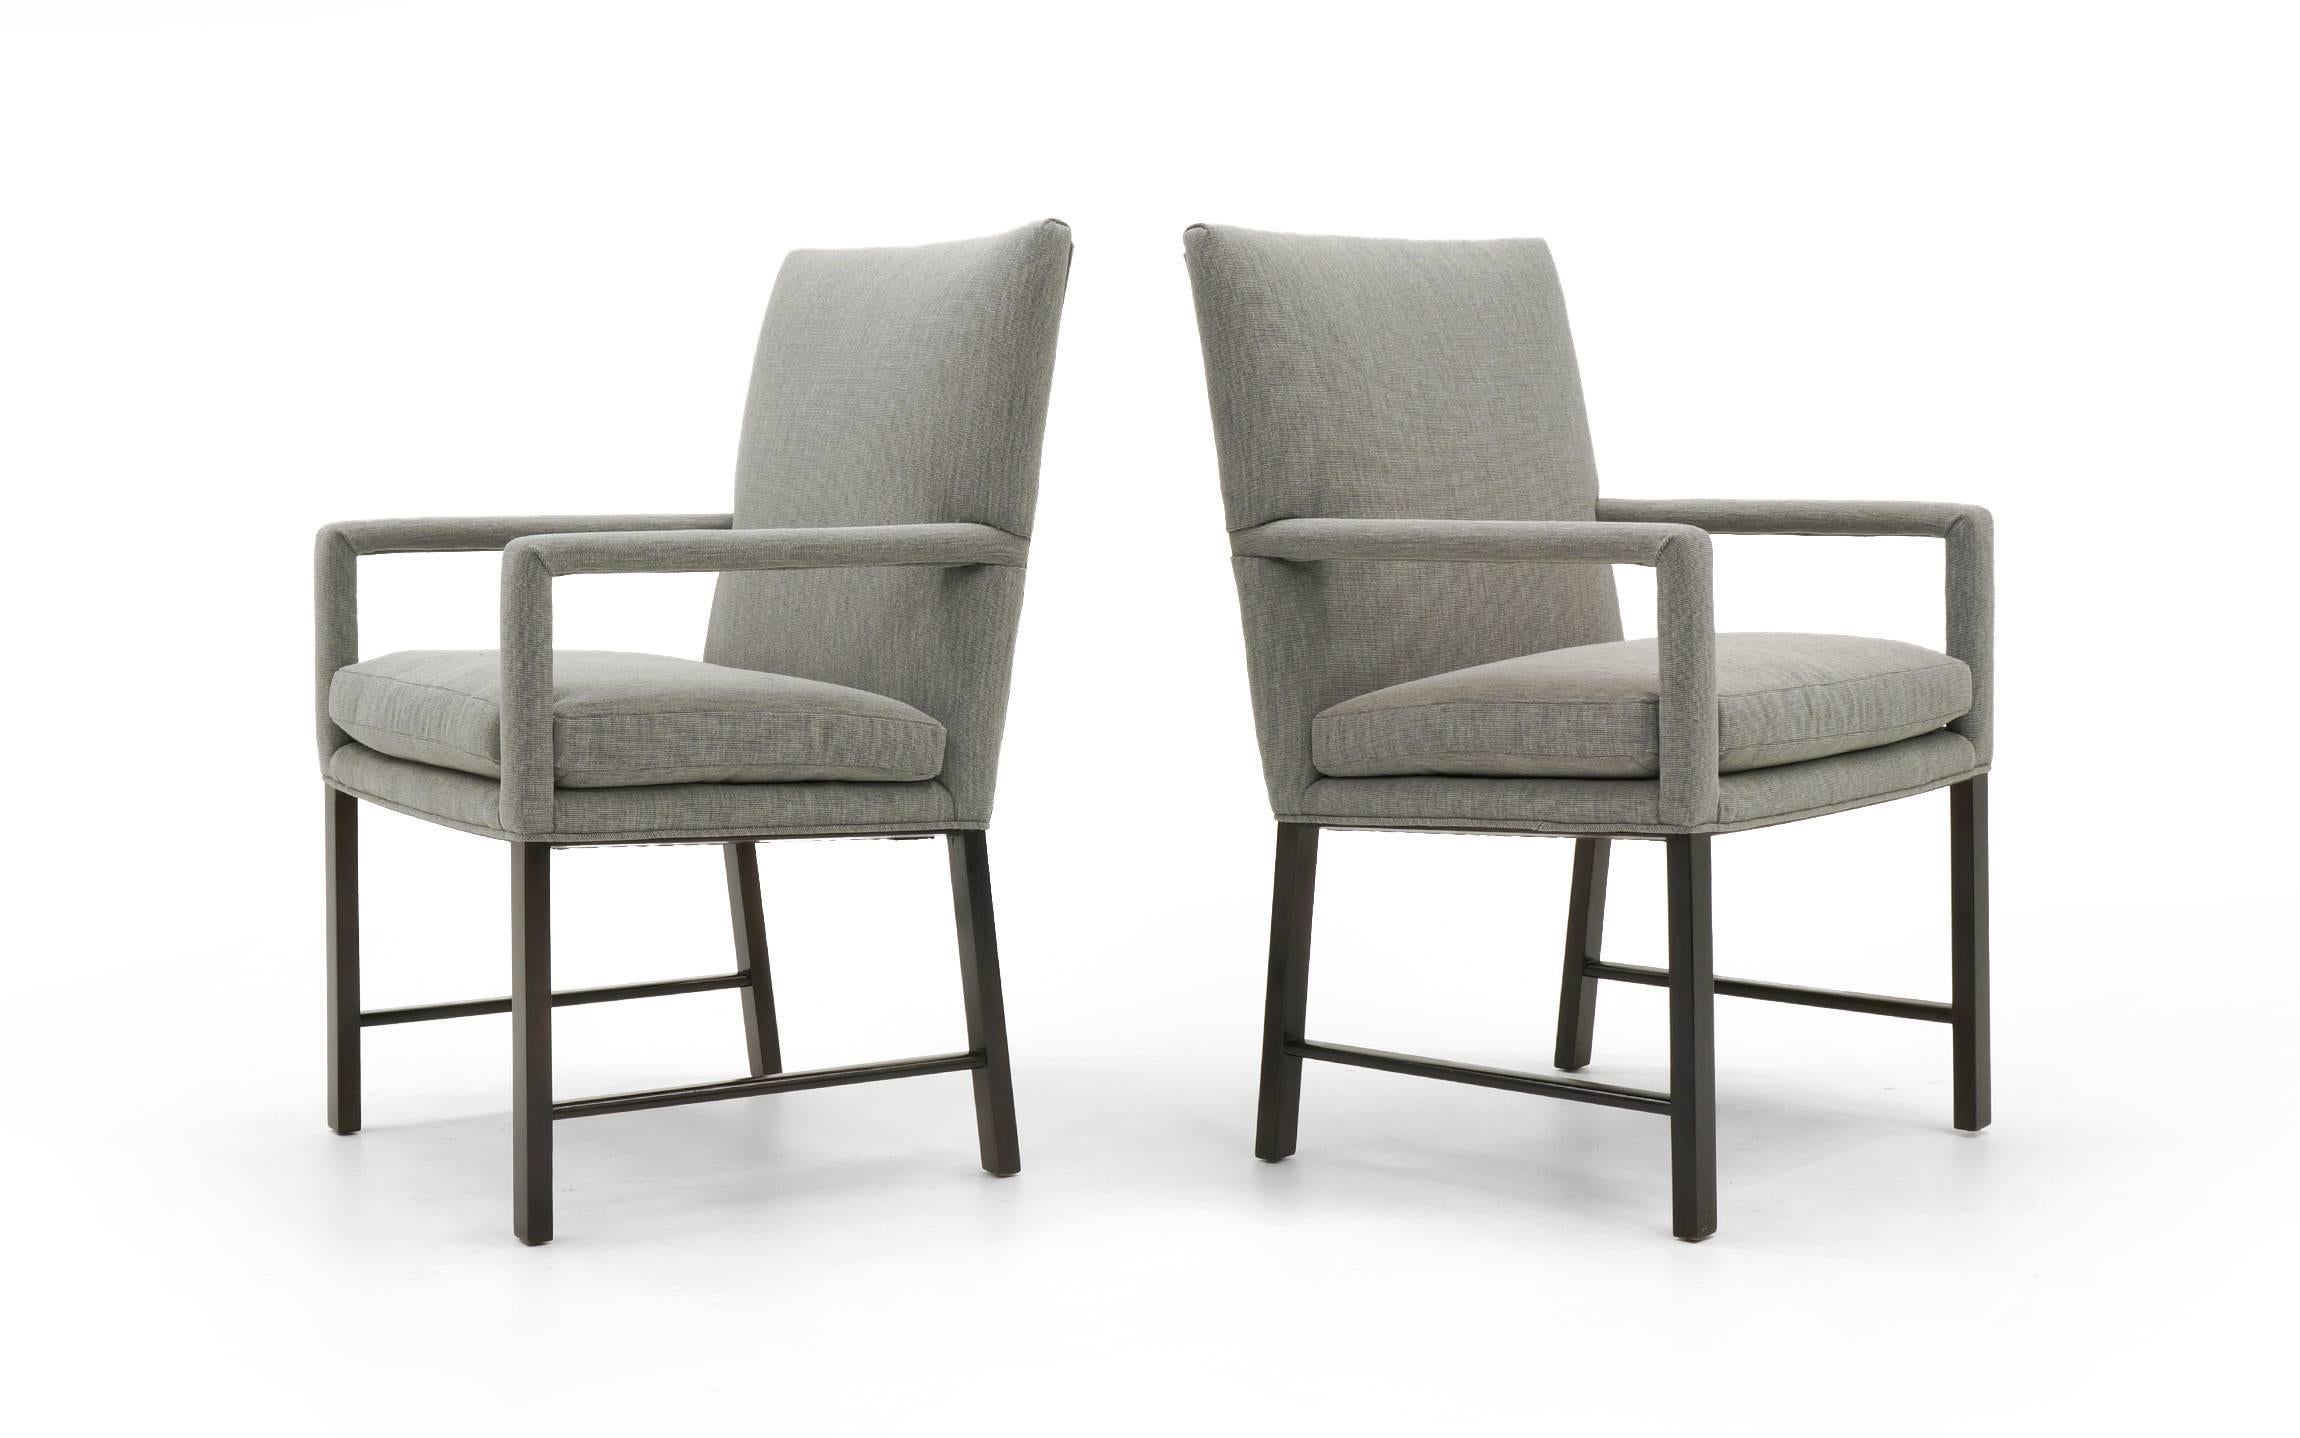 paul evans dining chairs